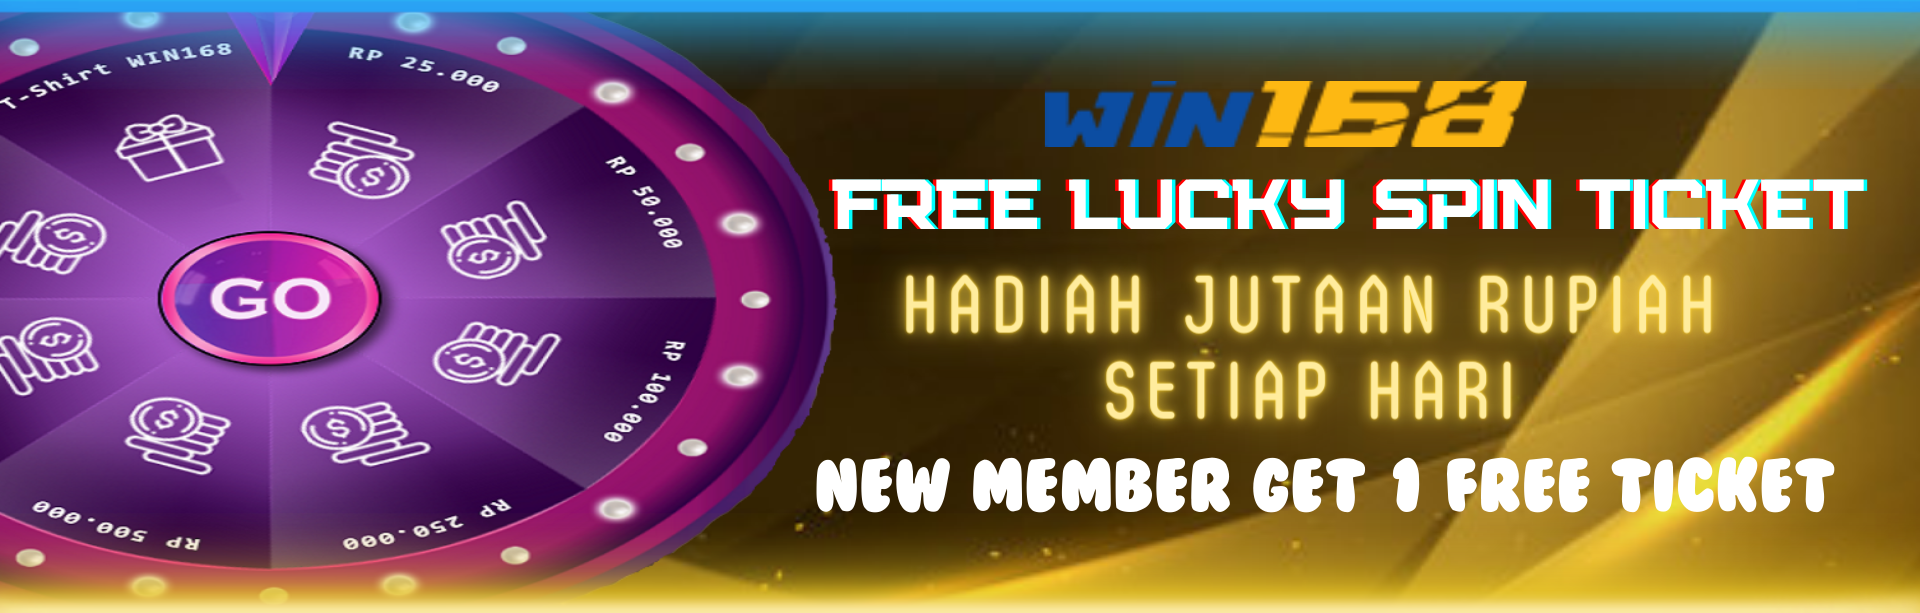 FREE LUCKY SPIN TICKET